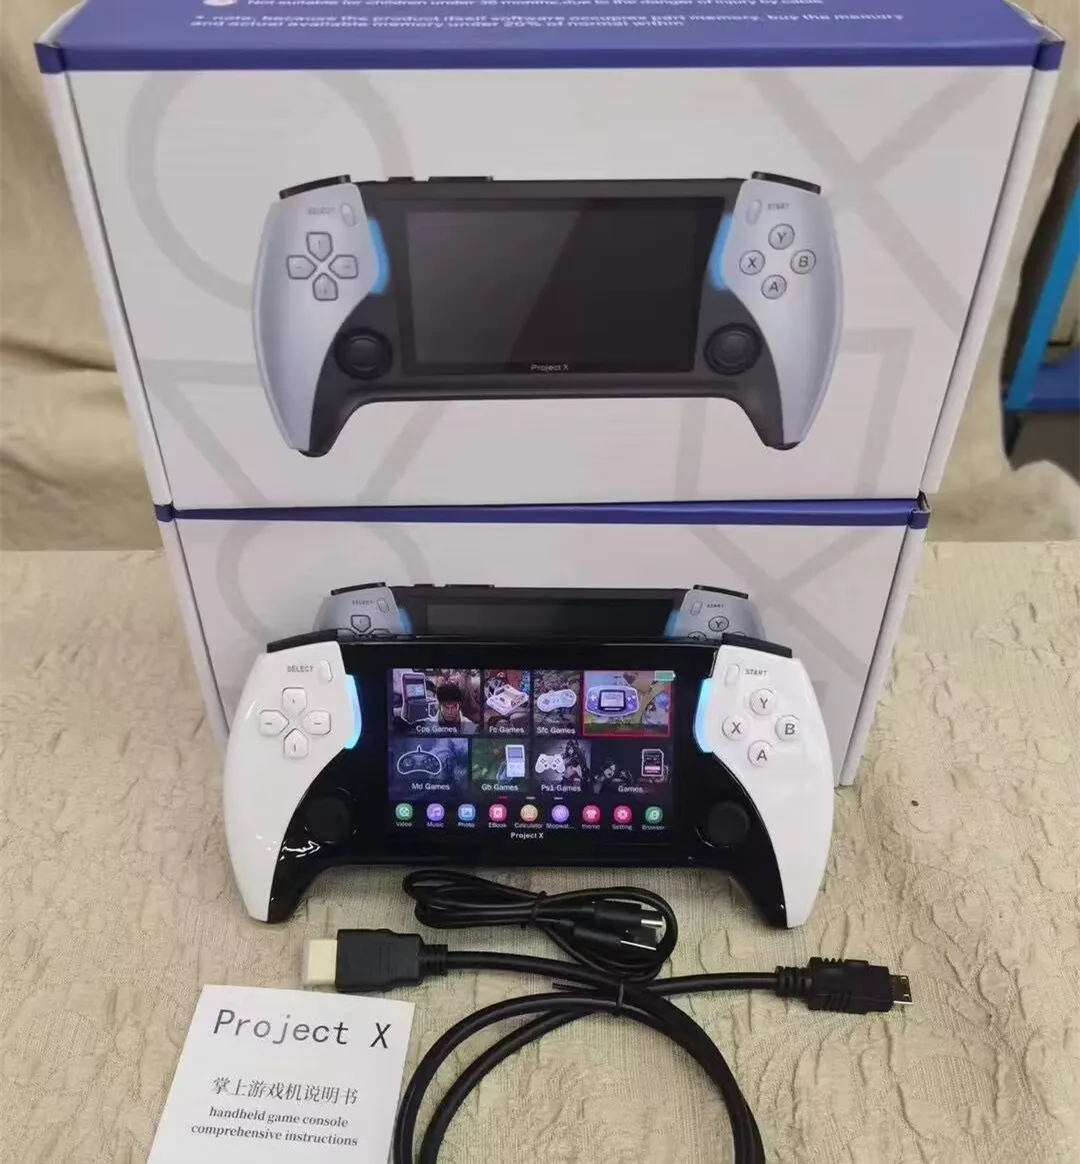 Project X Game Game Console Portable Game Players يدعمون كلاسيكيات Retro Games HD HD هدية ستيريو مكبر صوت مزدوجة للأطفال PS1 GB MD FC CPS Gaming